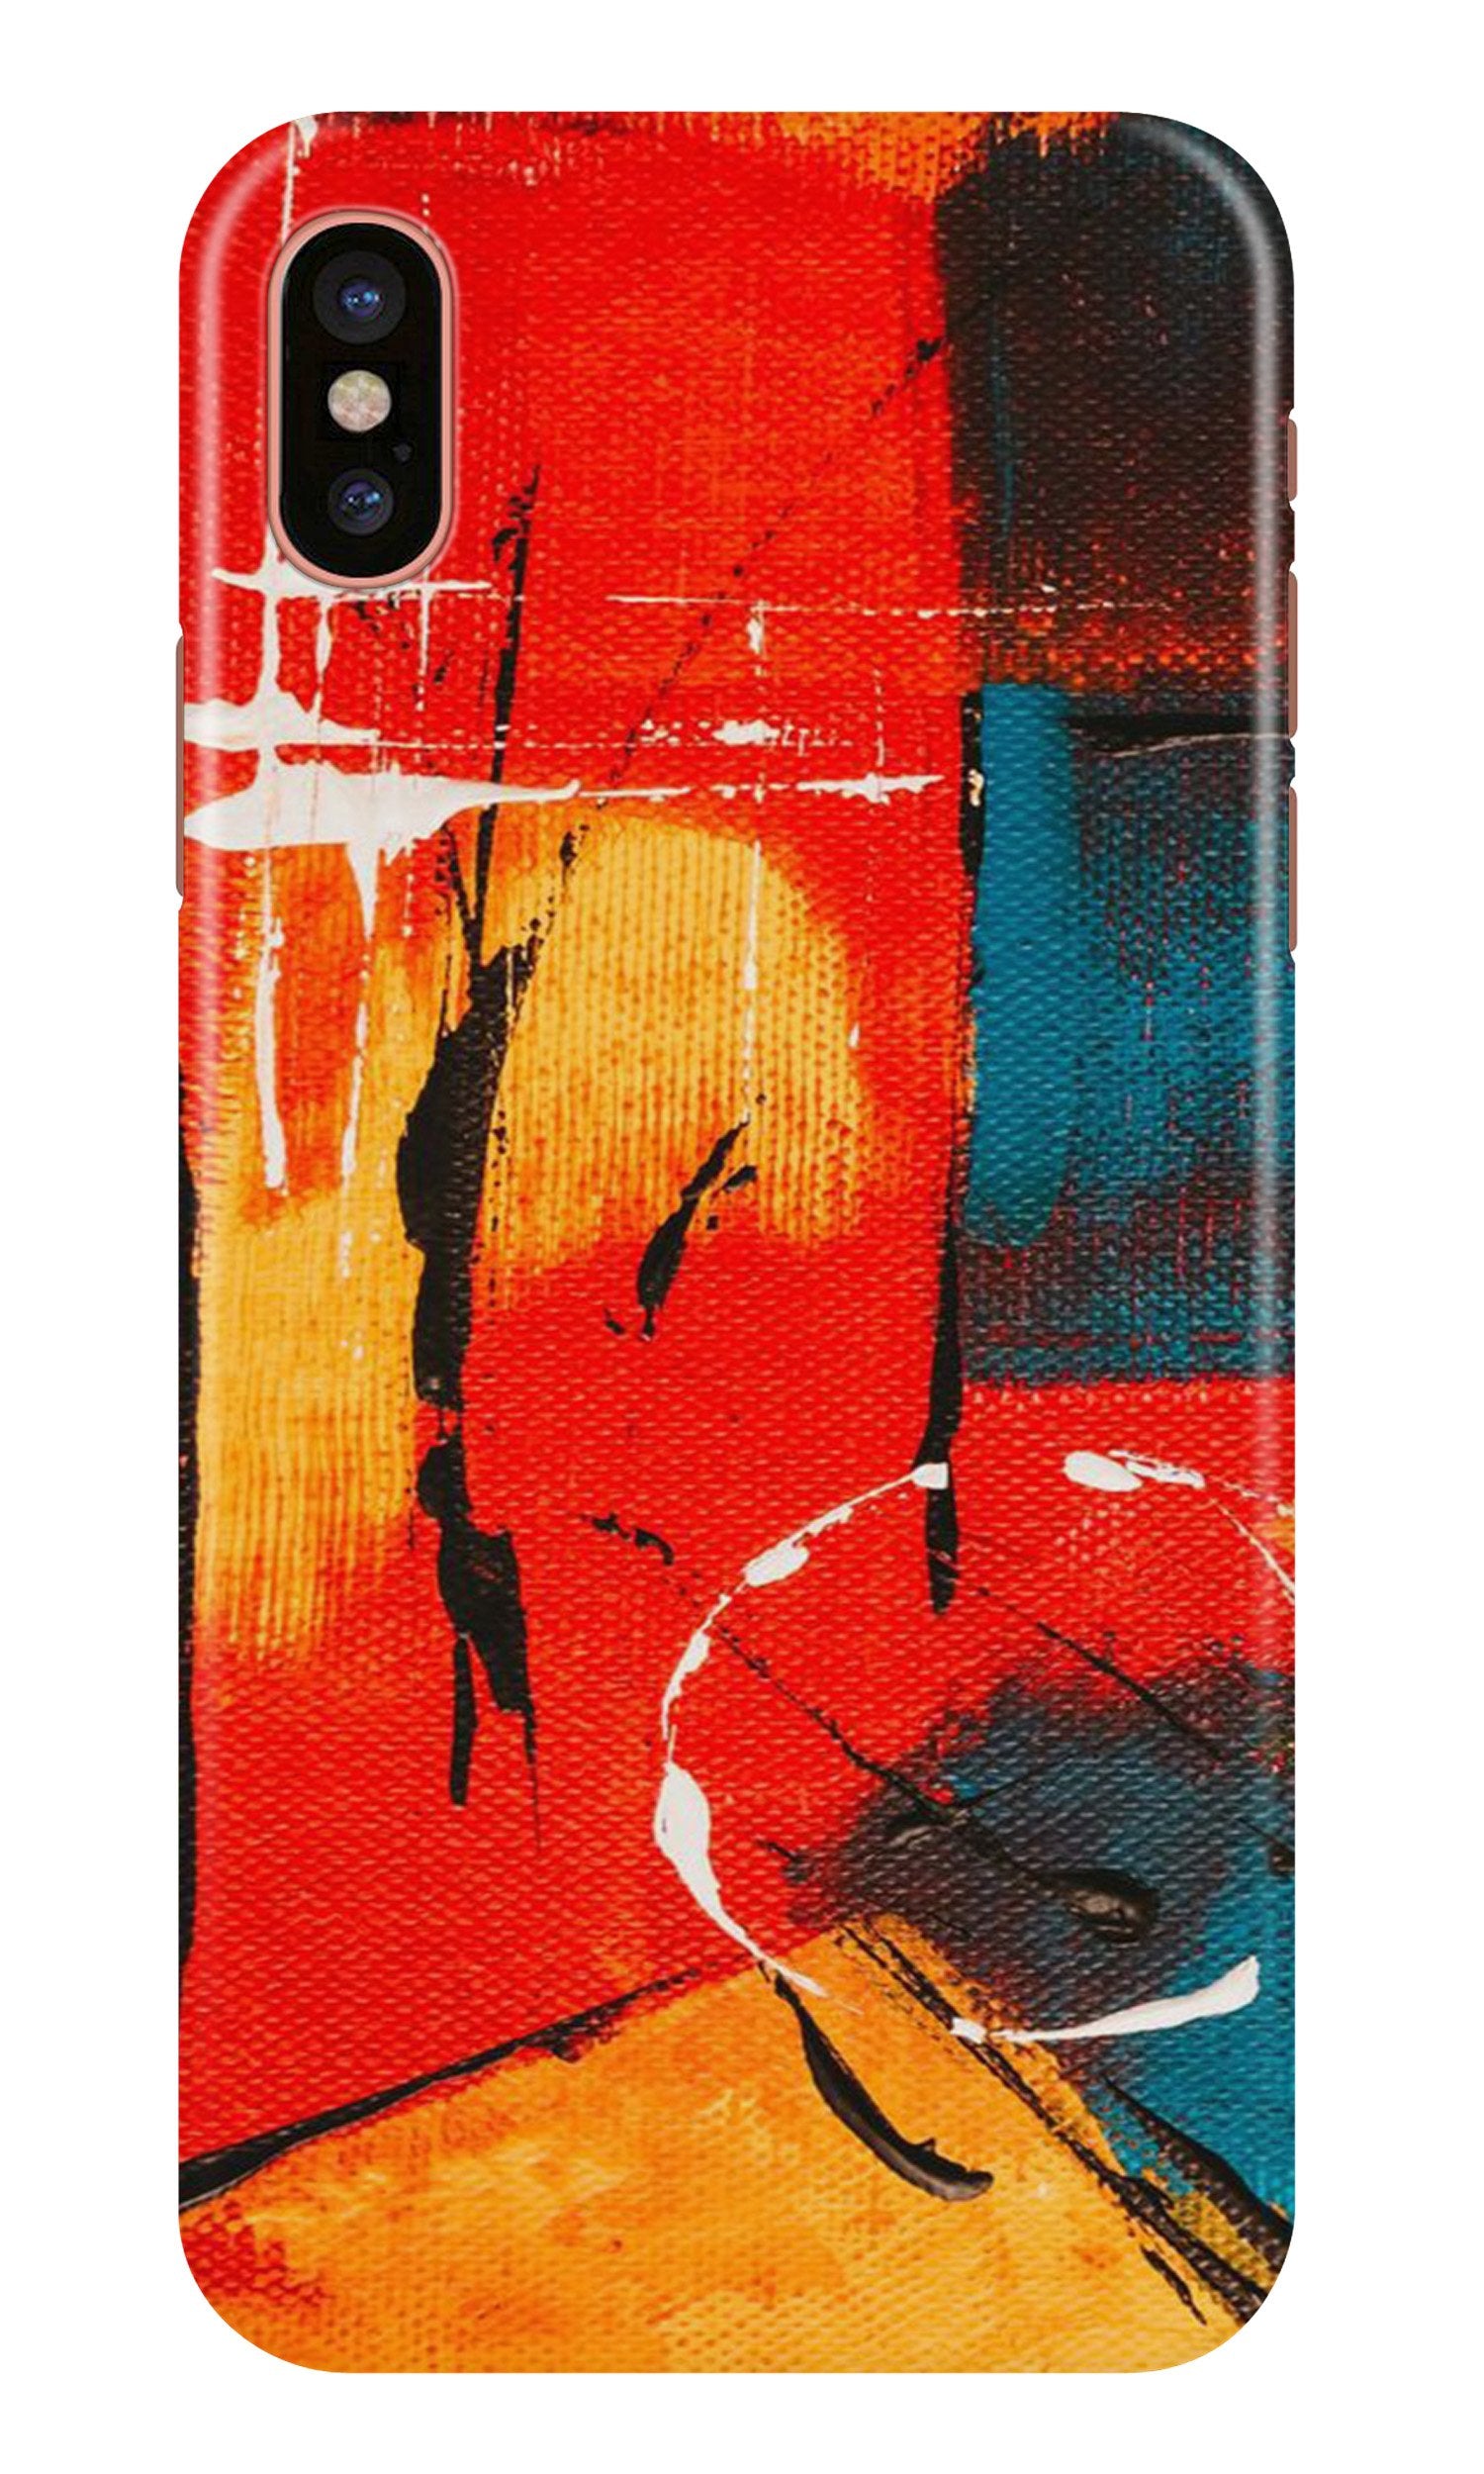 Modern Art Case for iPhone Xs Max (Design No. 239)